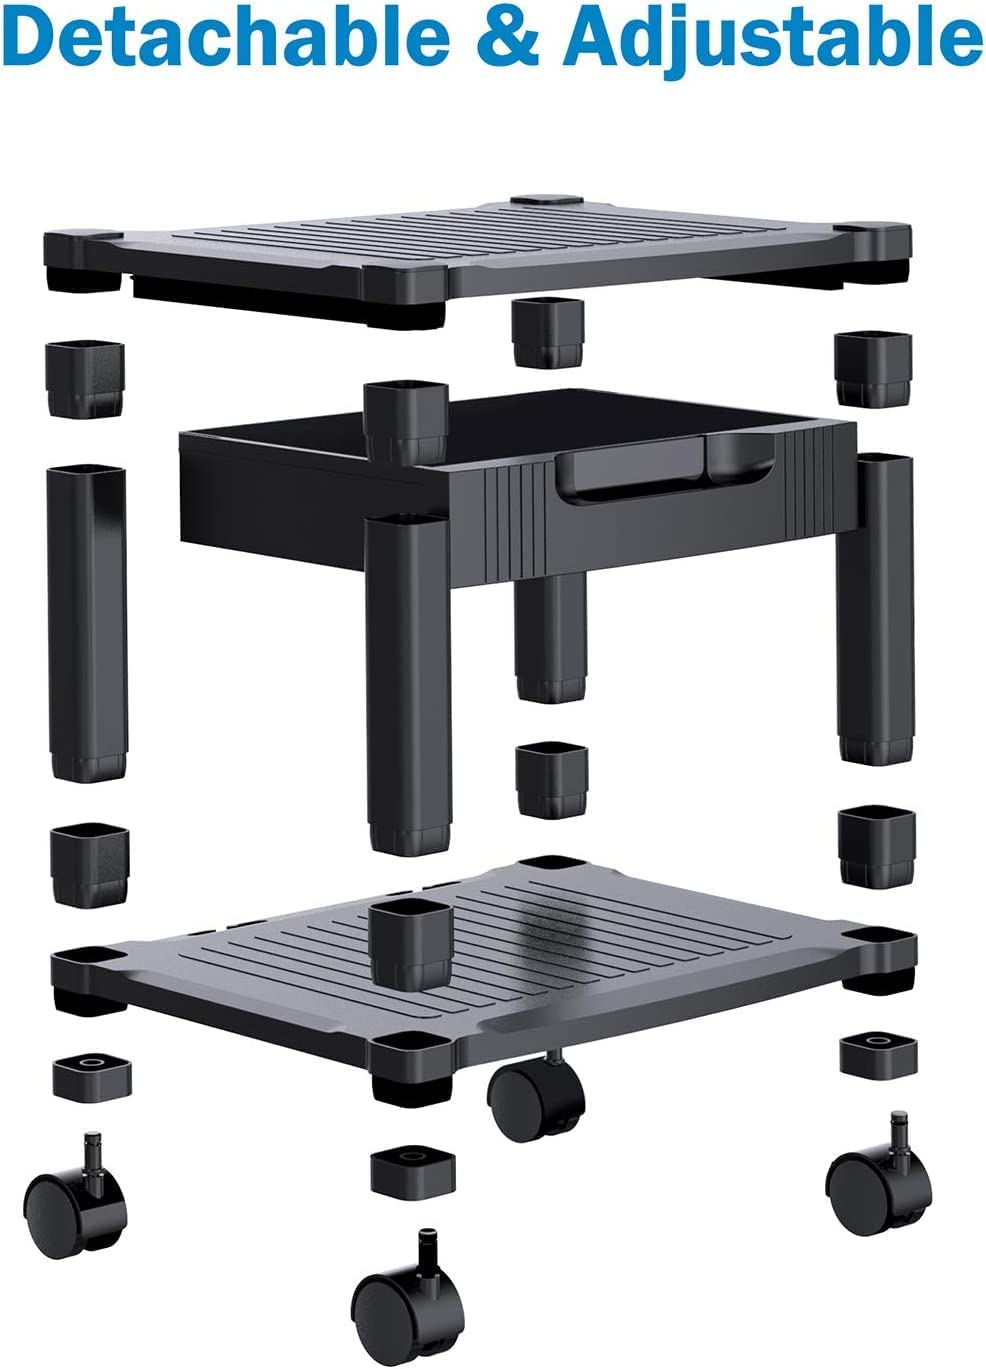 Printer Stand with Storage Drawers & Cable Management Adjustable Printer Desk with 4 Wheels & Lock Mechanism